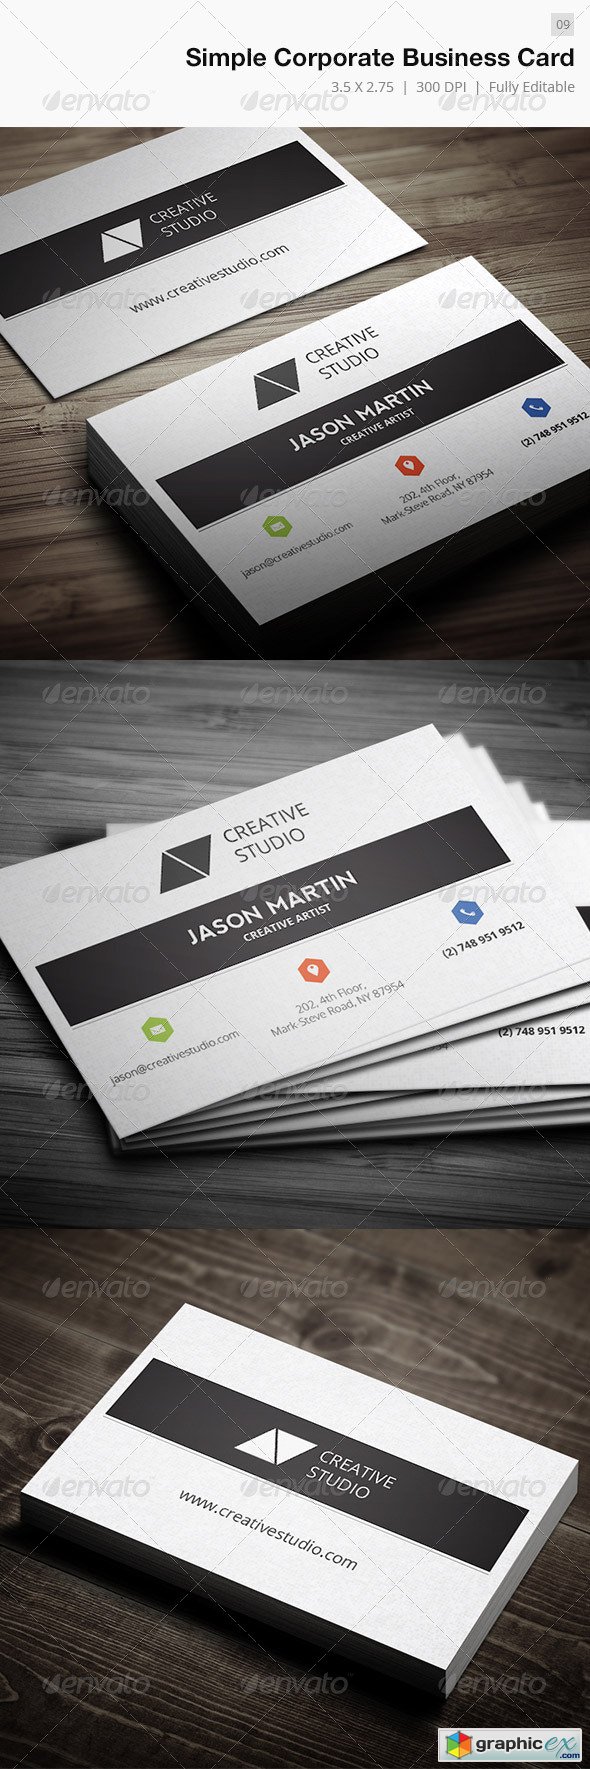 Clean Corporate Business Card - 09